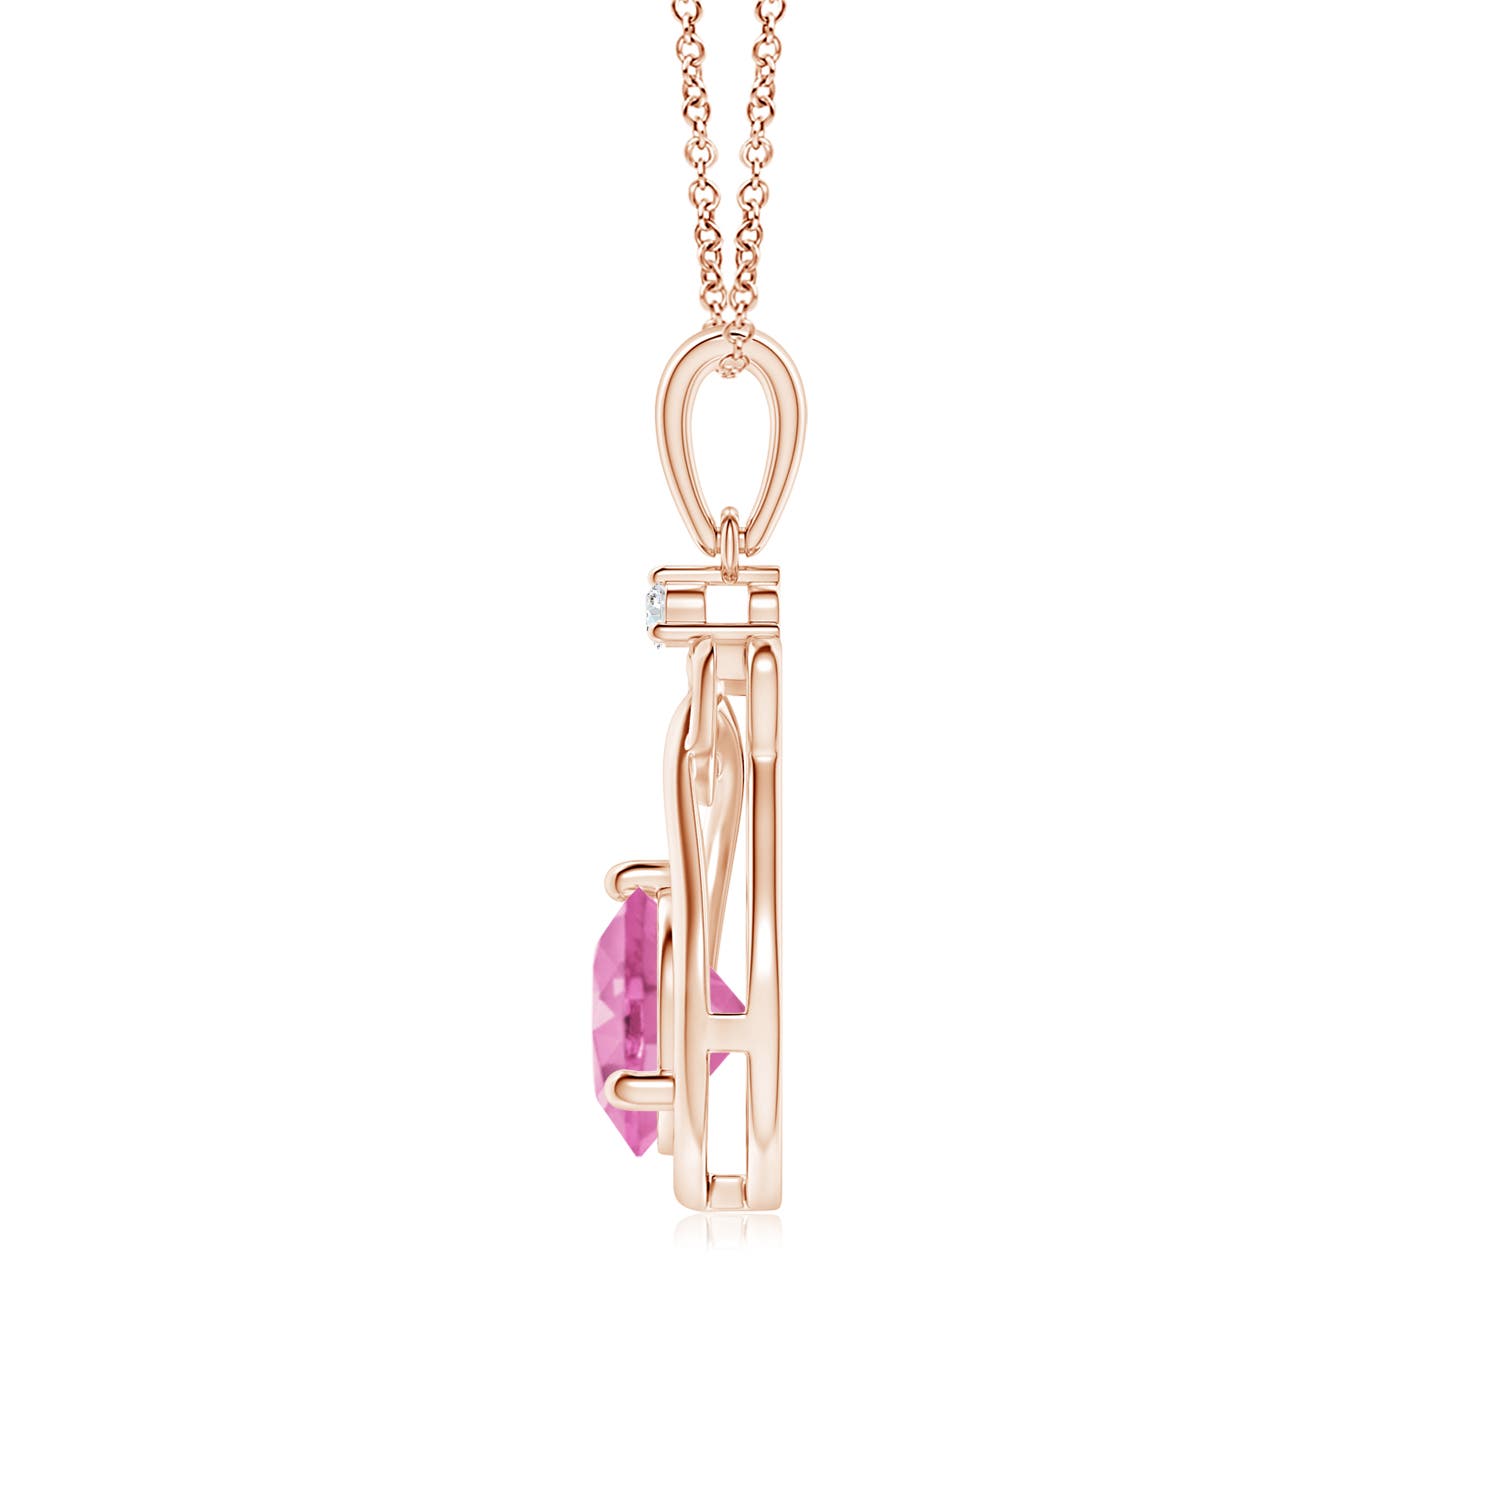 AA - Pink Sapphire / 1.01 CT / 14 KT Rose Gold